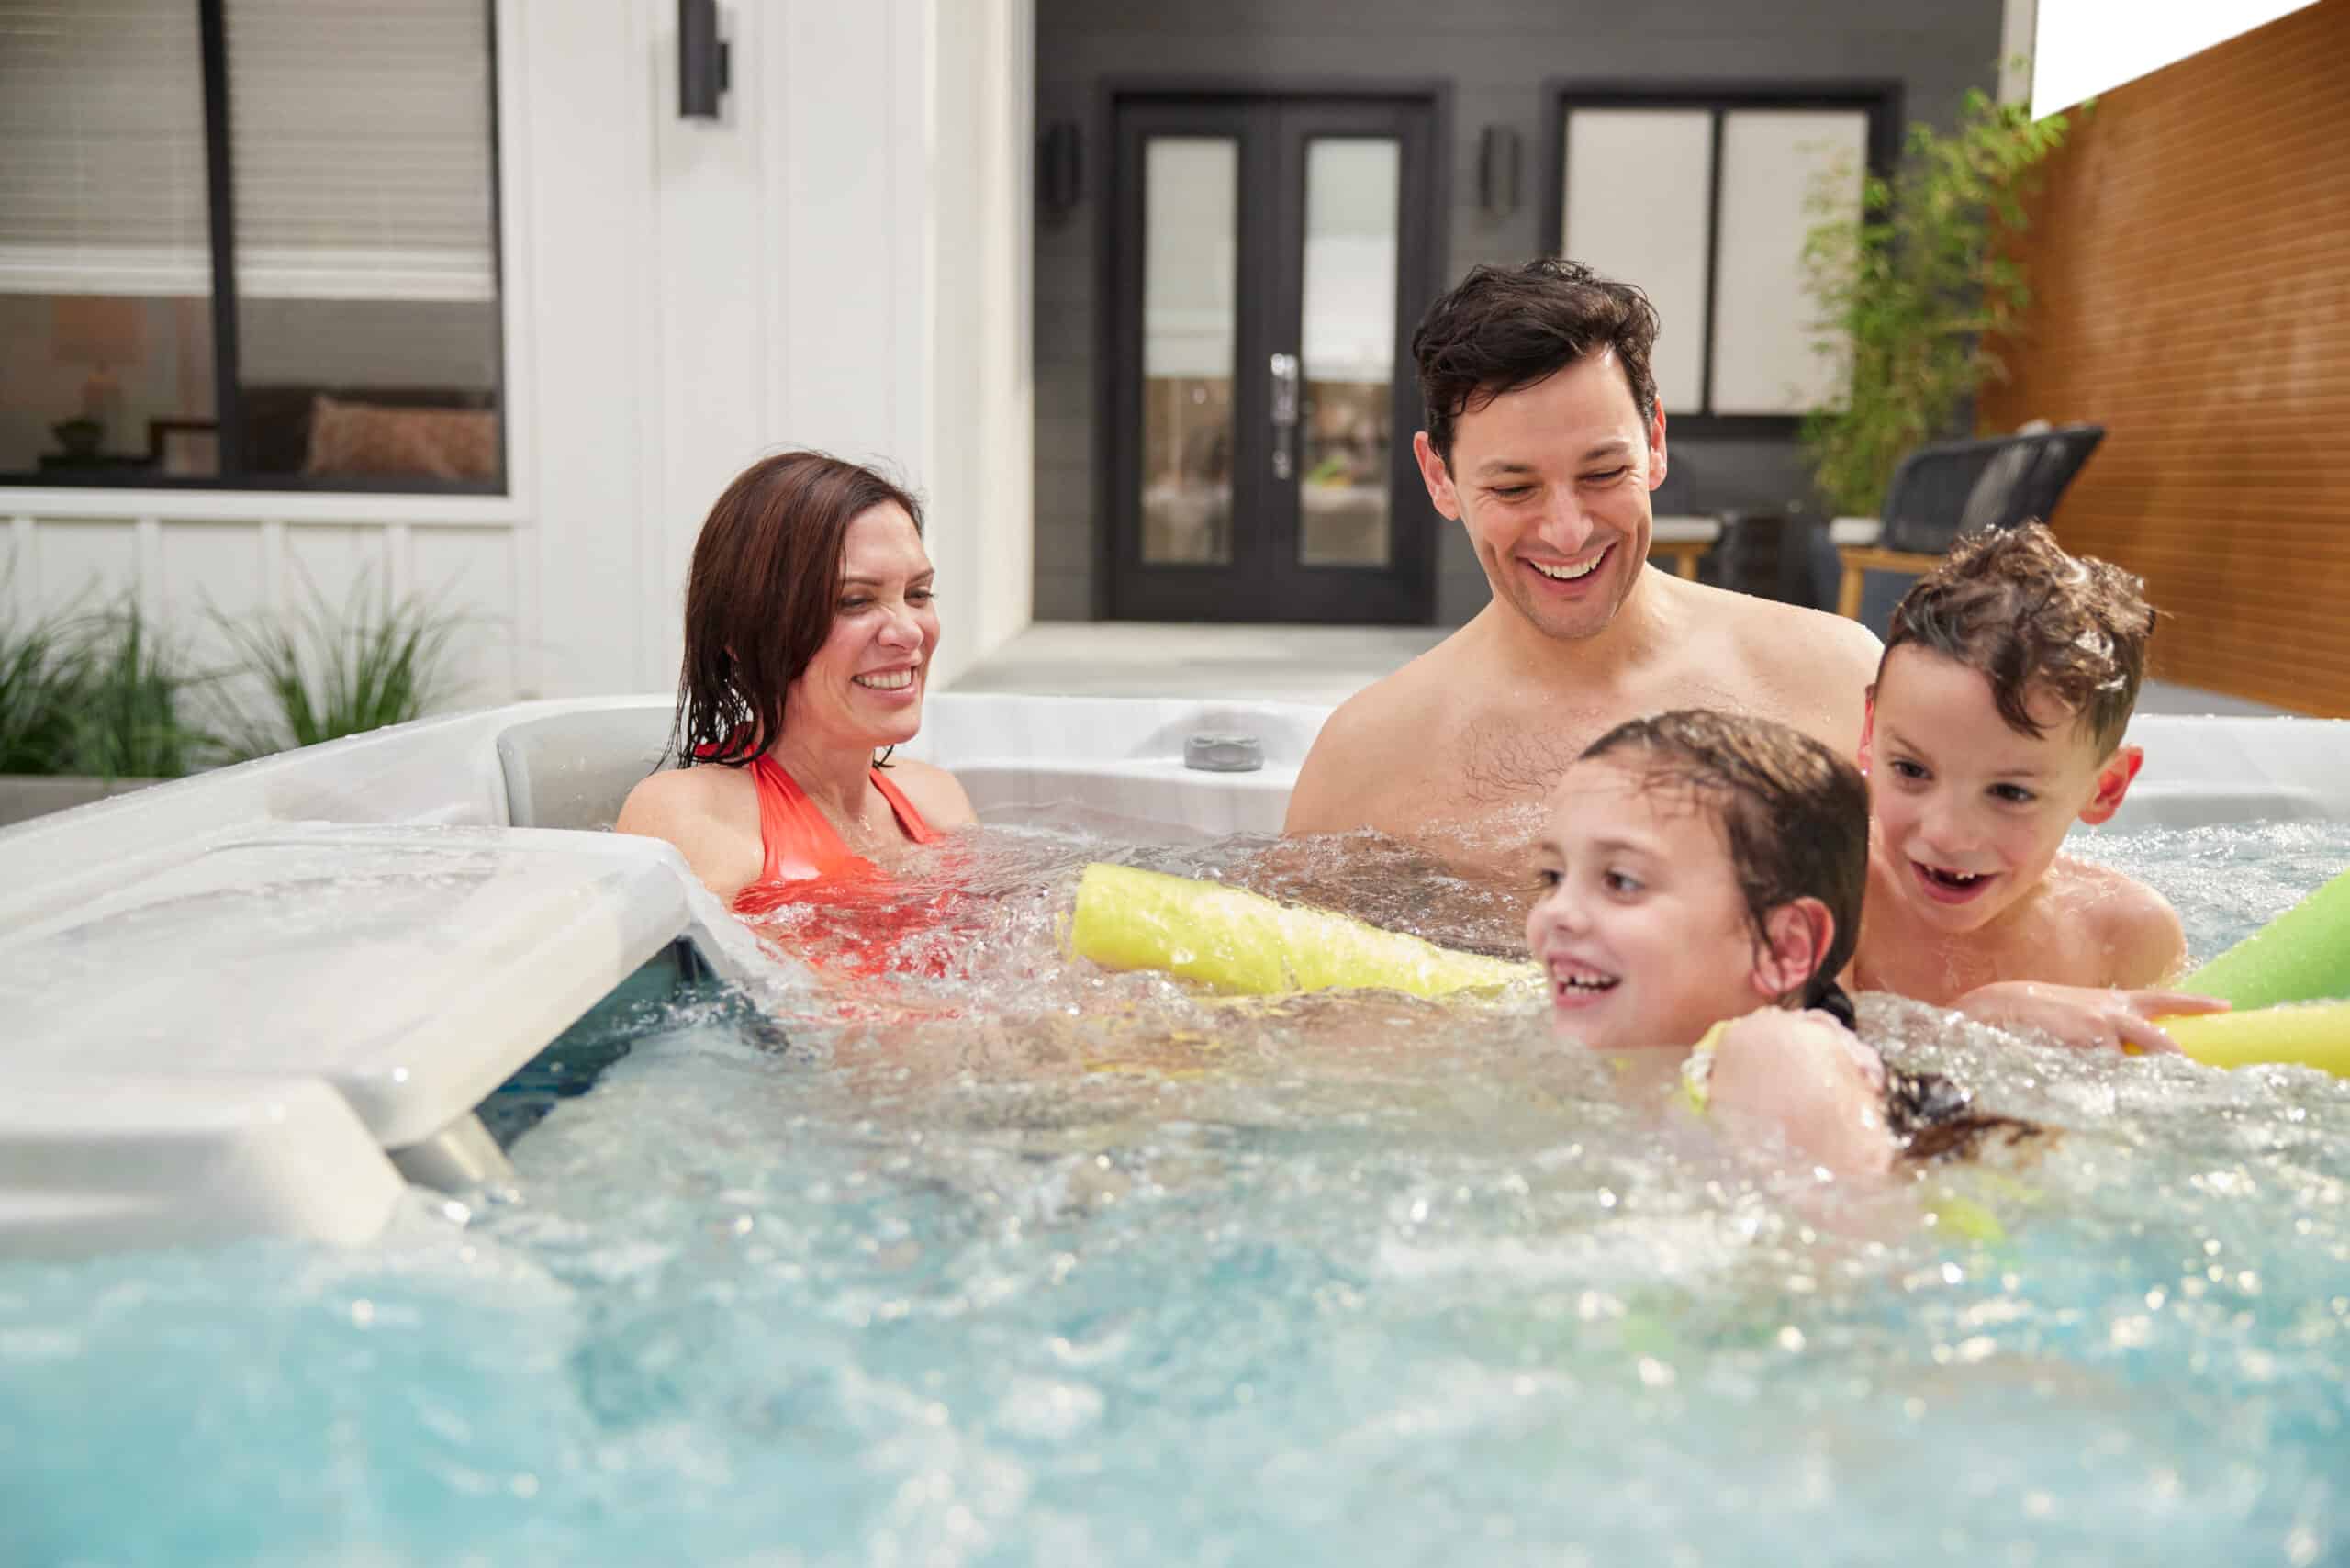 A hot tub at home offers an array of benefits.